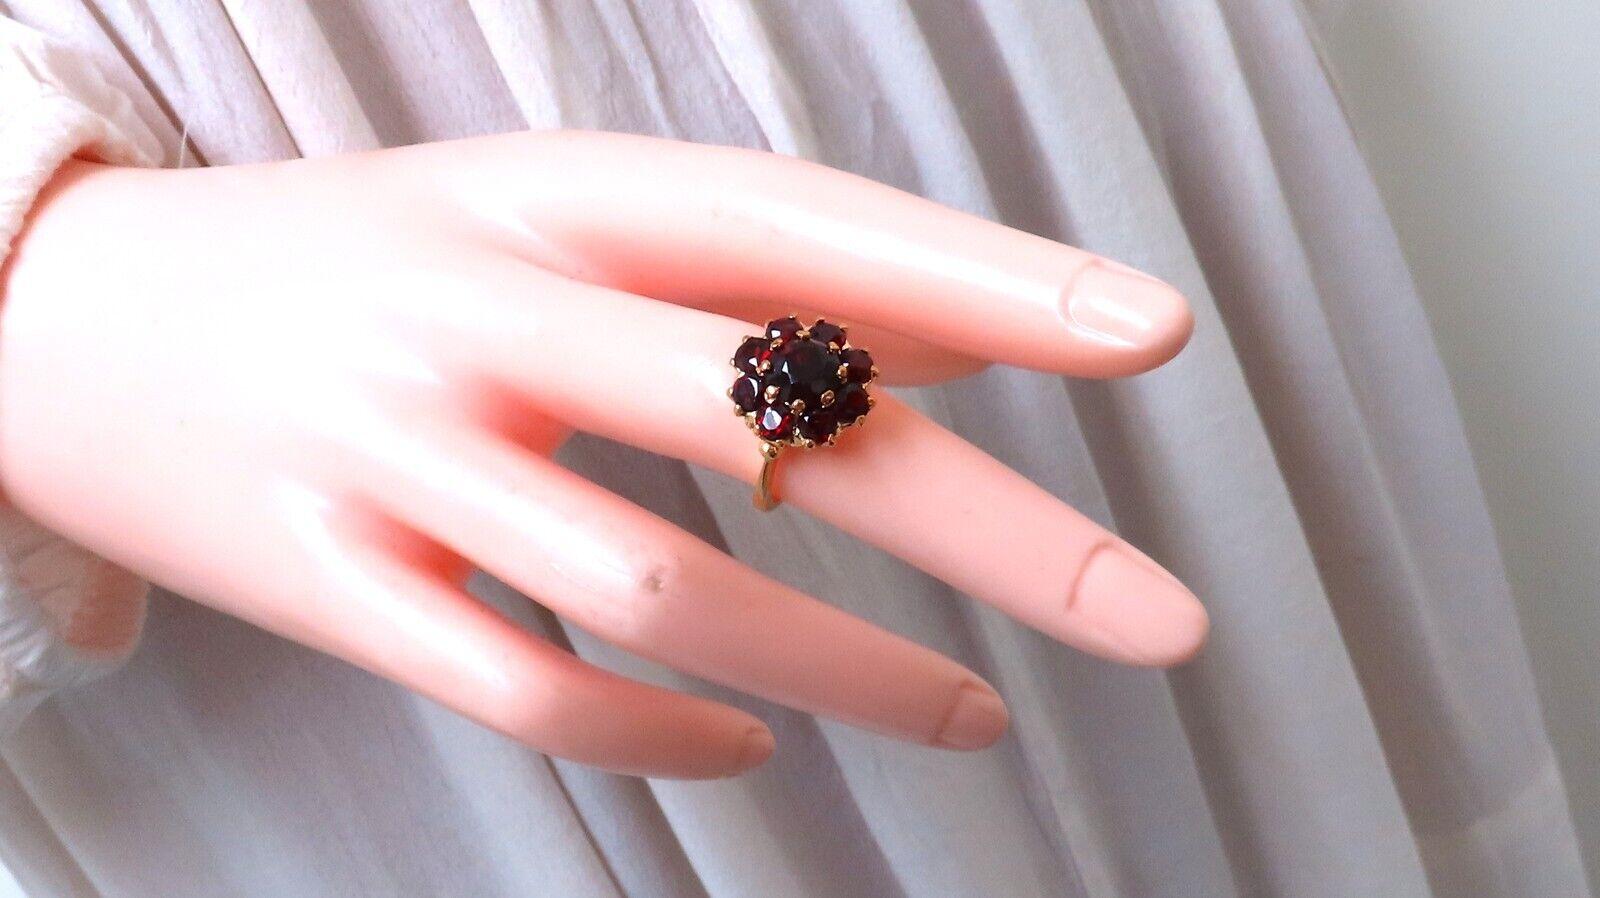 3 carat natural round-shaped garnets cluster ring.

Clean clarity, crimson red colors.

Deck of ring 15 mm

Depth of ring 7.7 mm

18 karat yellow gold, 5 g

Current size 5.5 and we may resize, please inquire.